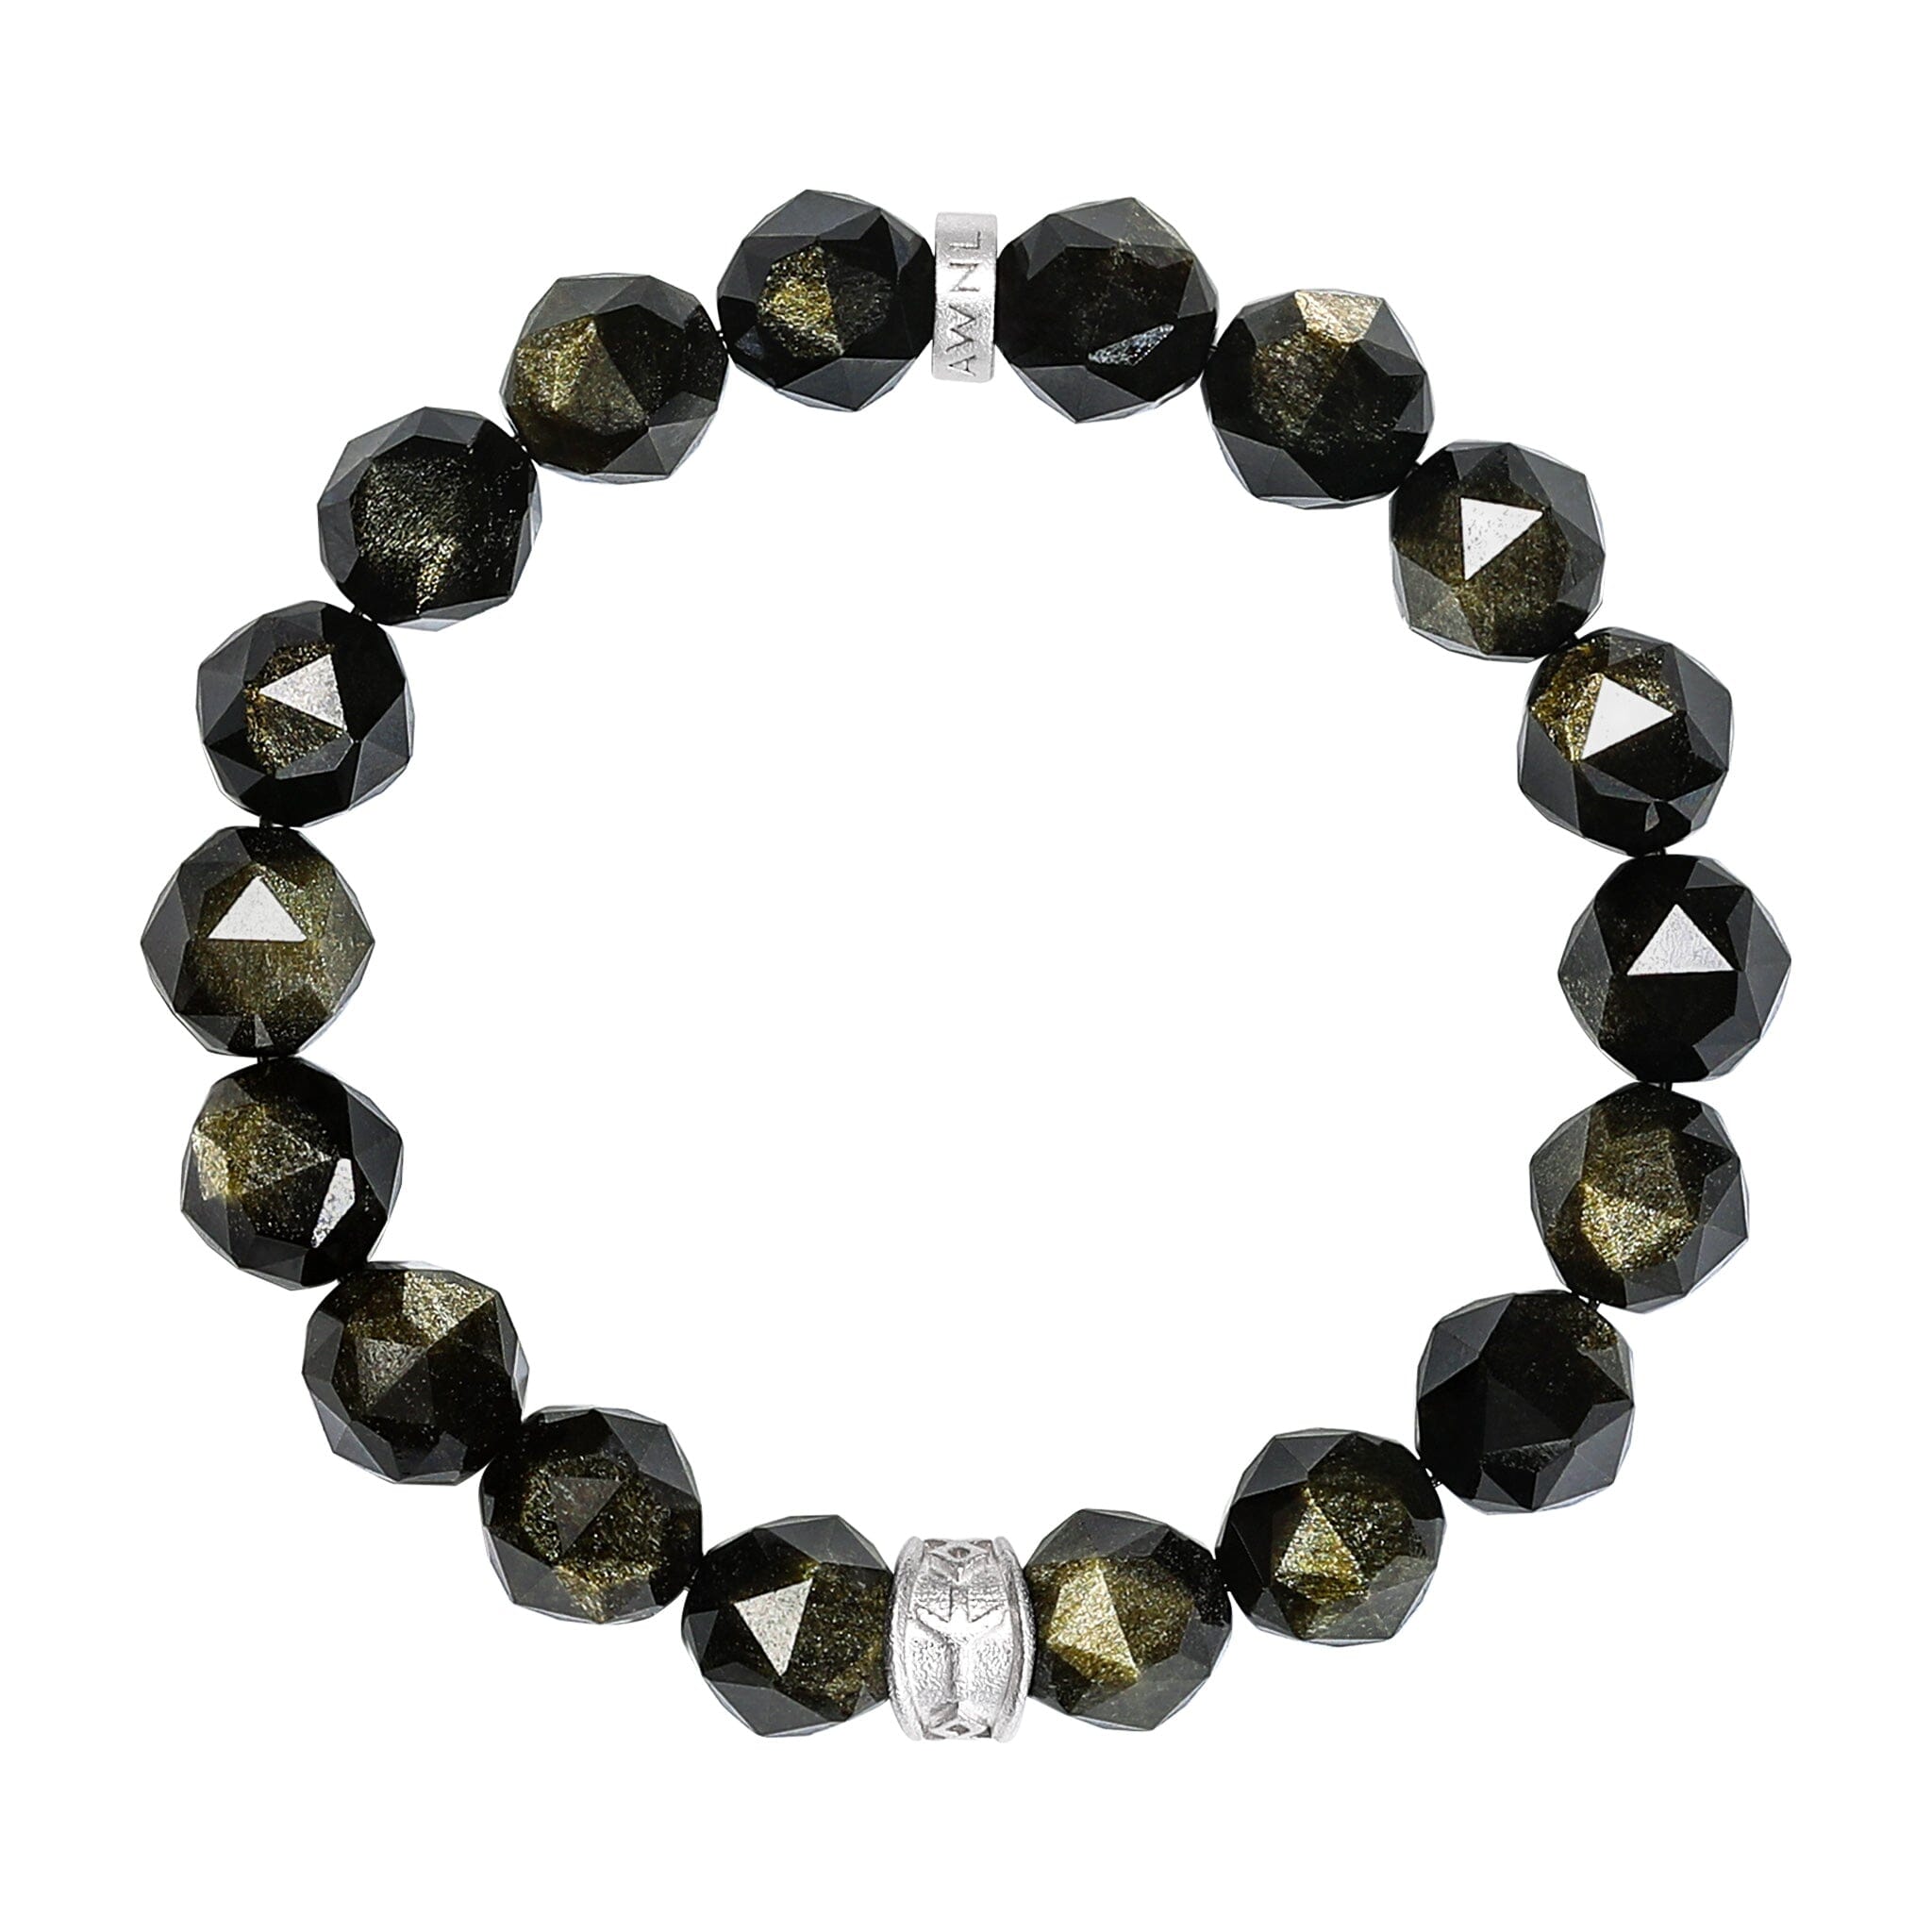 Men's Beaded Bracelet with Engraved Runes and Golden Obsidian Bracelets WAA FASHION GROUP 